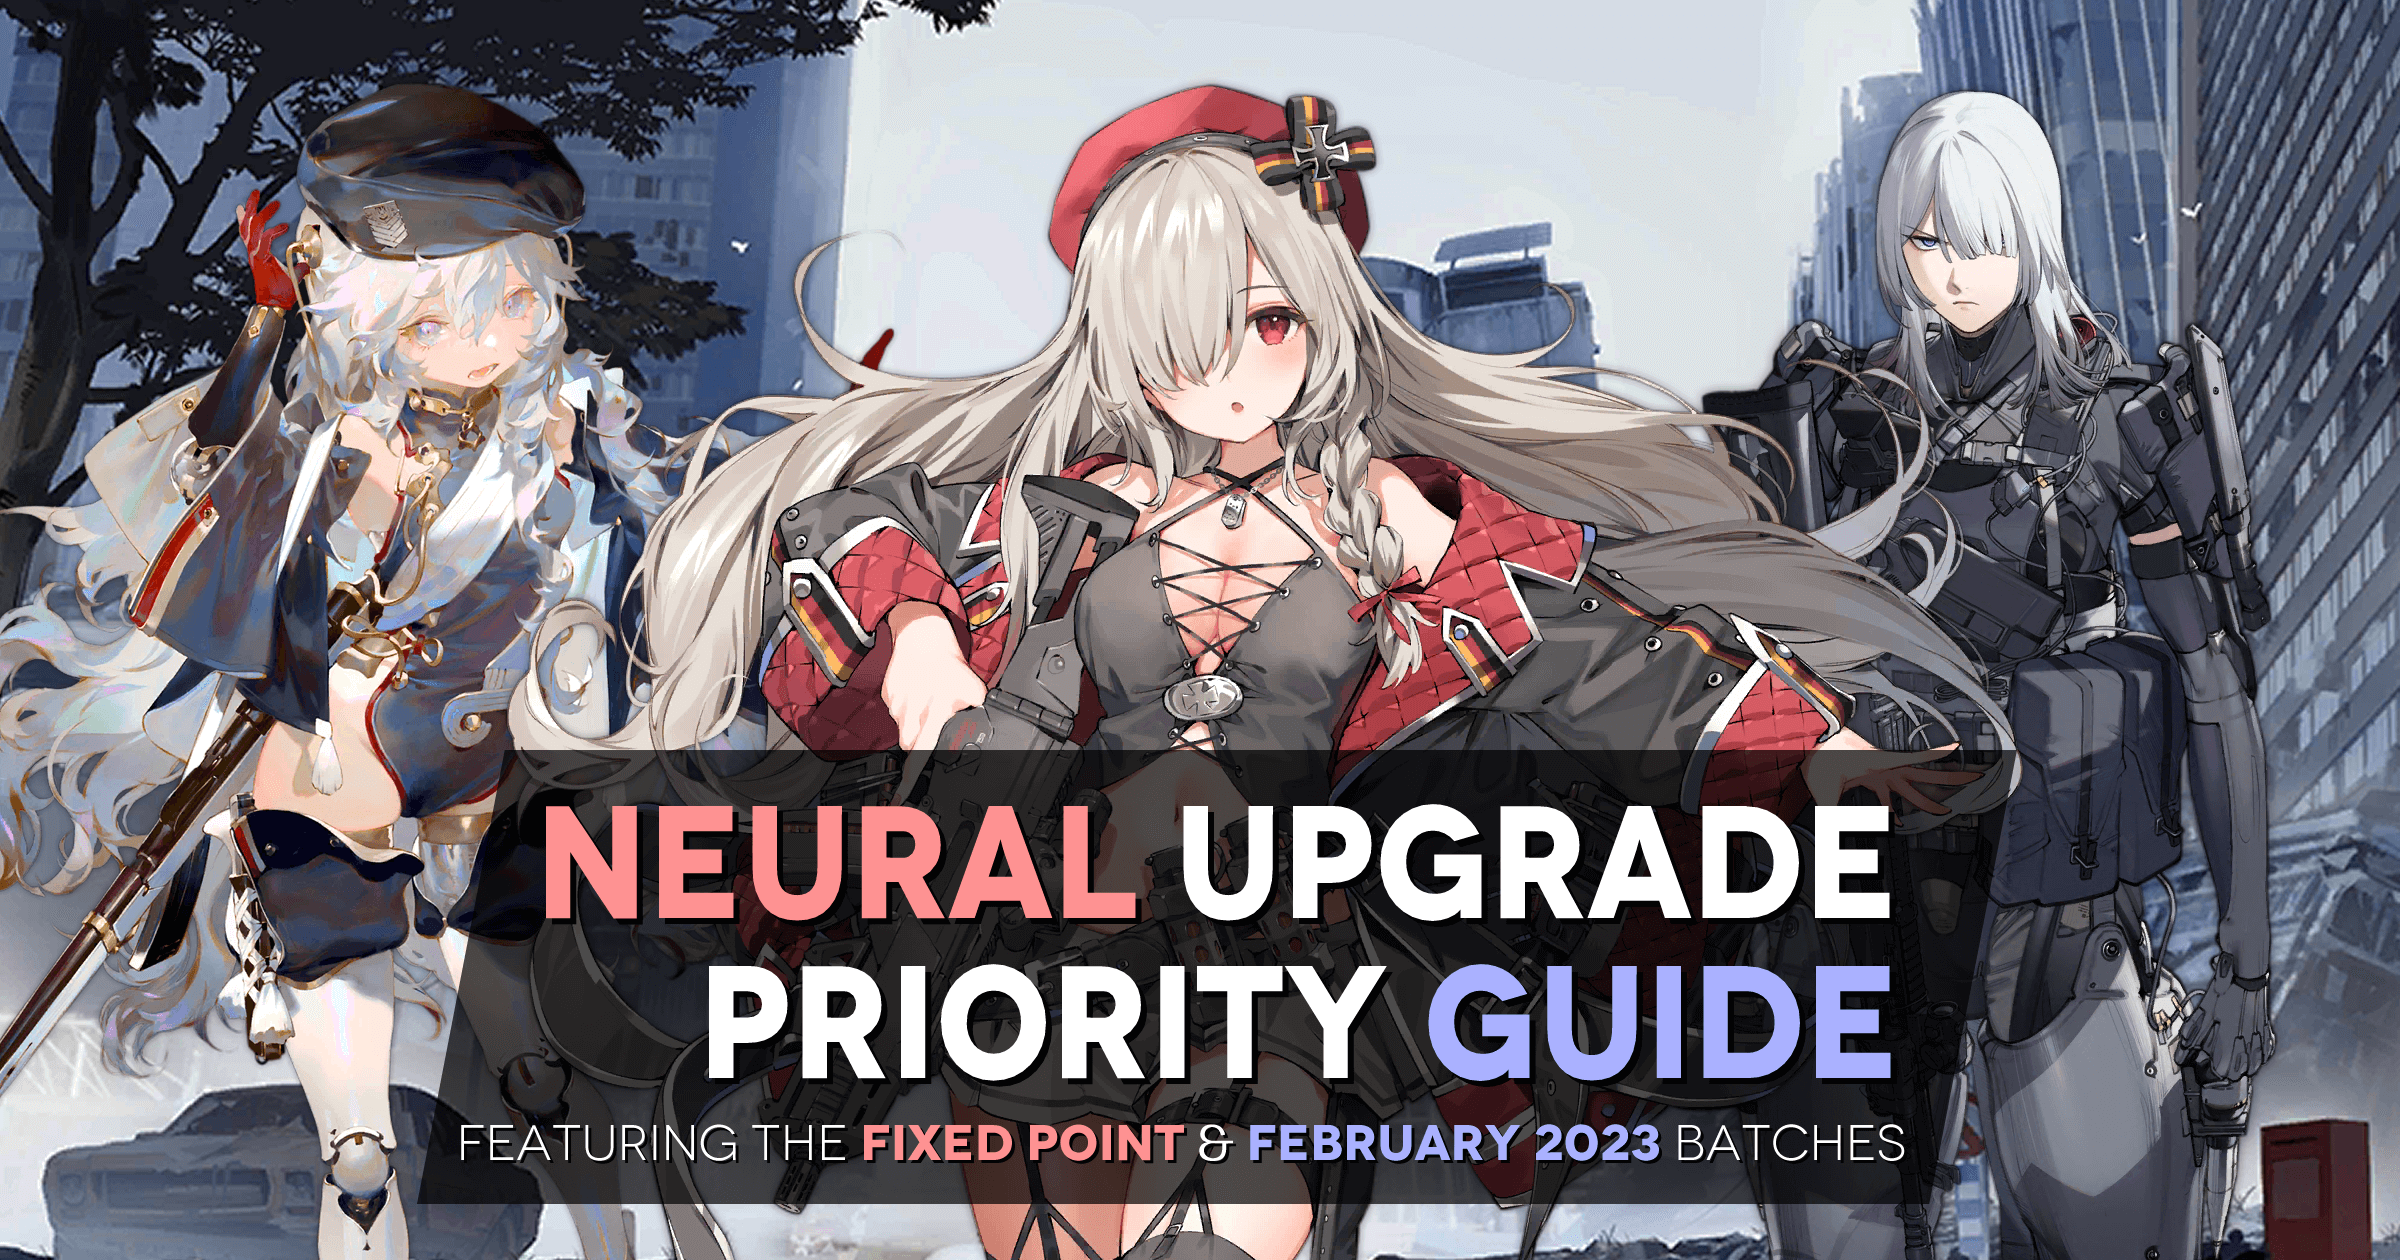 Neural Upgrade Priority Guide featuring the Fixed Point and February 2023 upgrades!